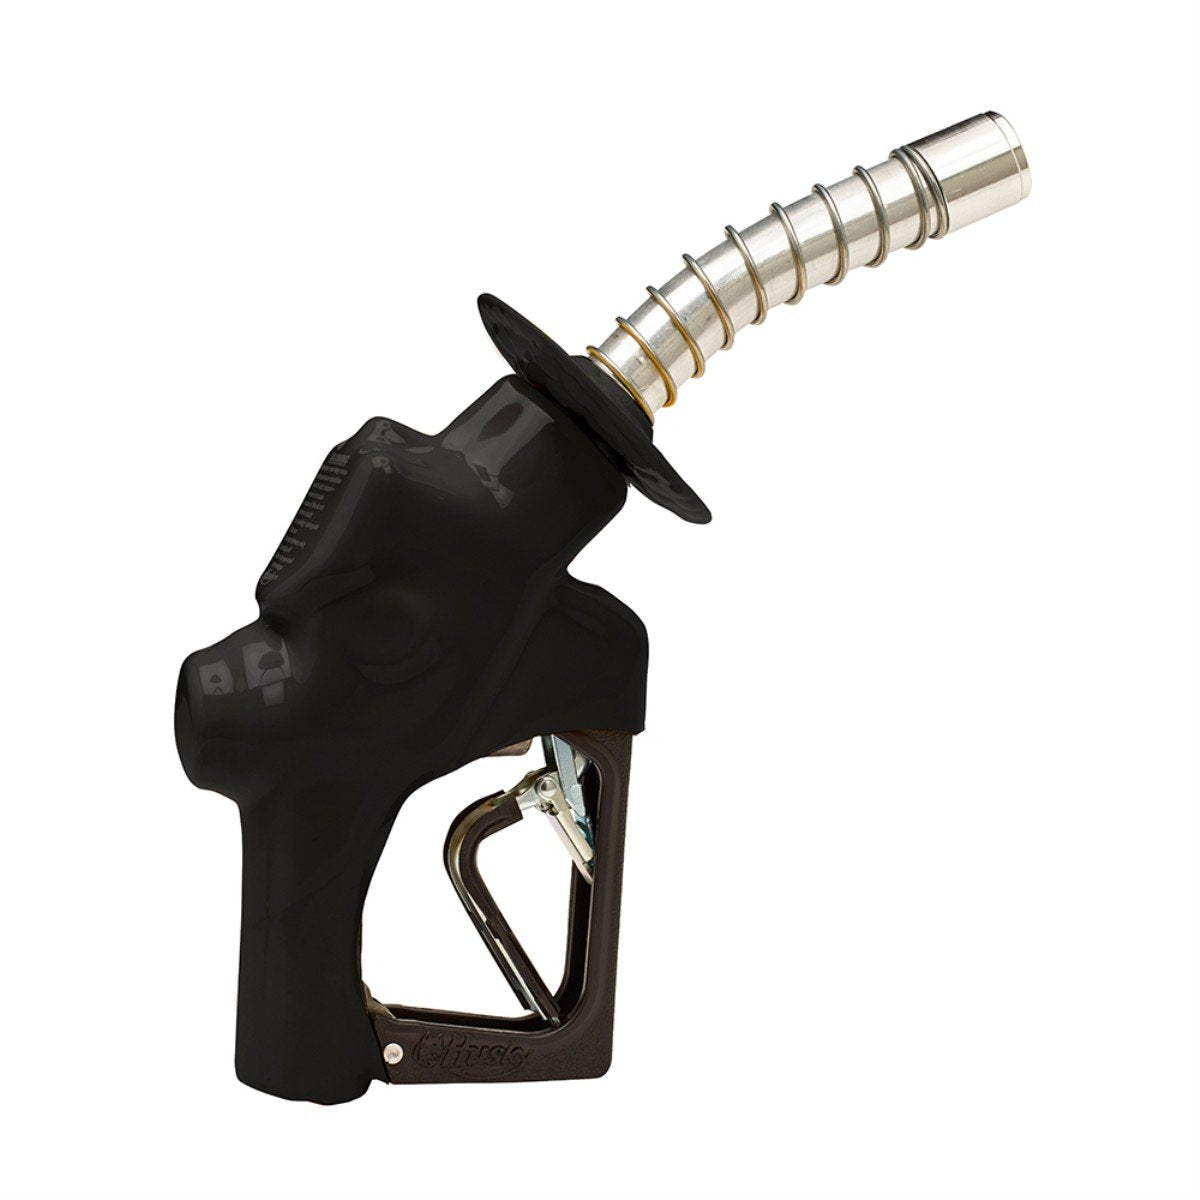 Husky 177610-04 New VIIIS Pressure Activated Heavy Duty Diesel Nozzle with 3-Notch Hold Open Clip, Black